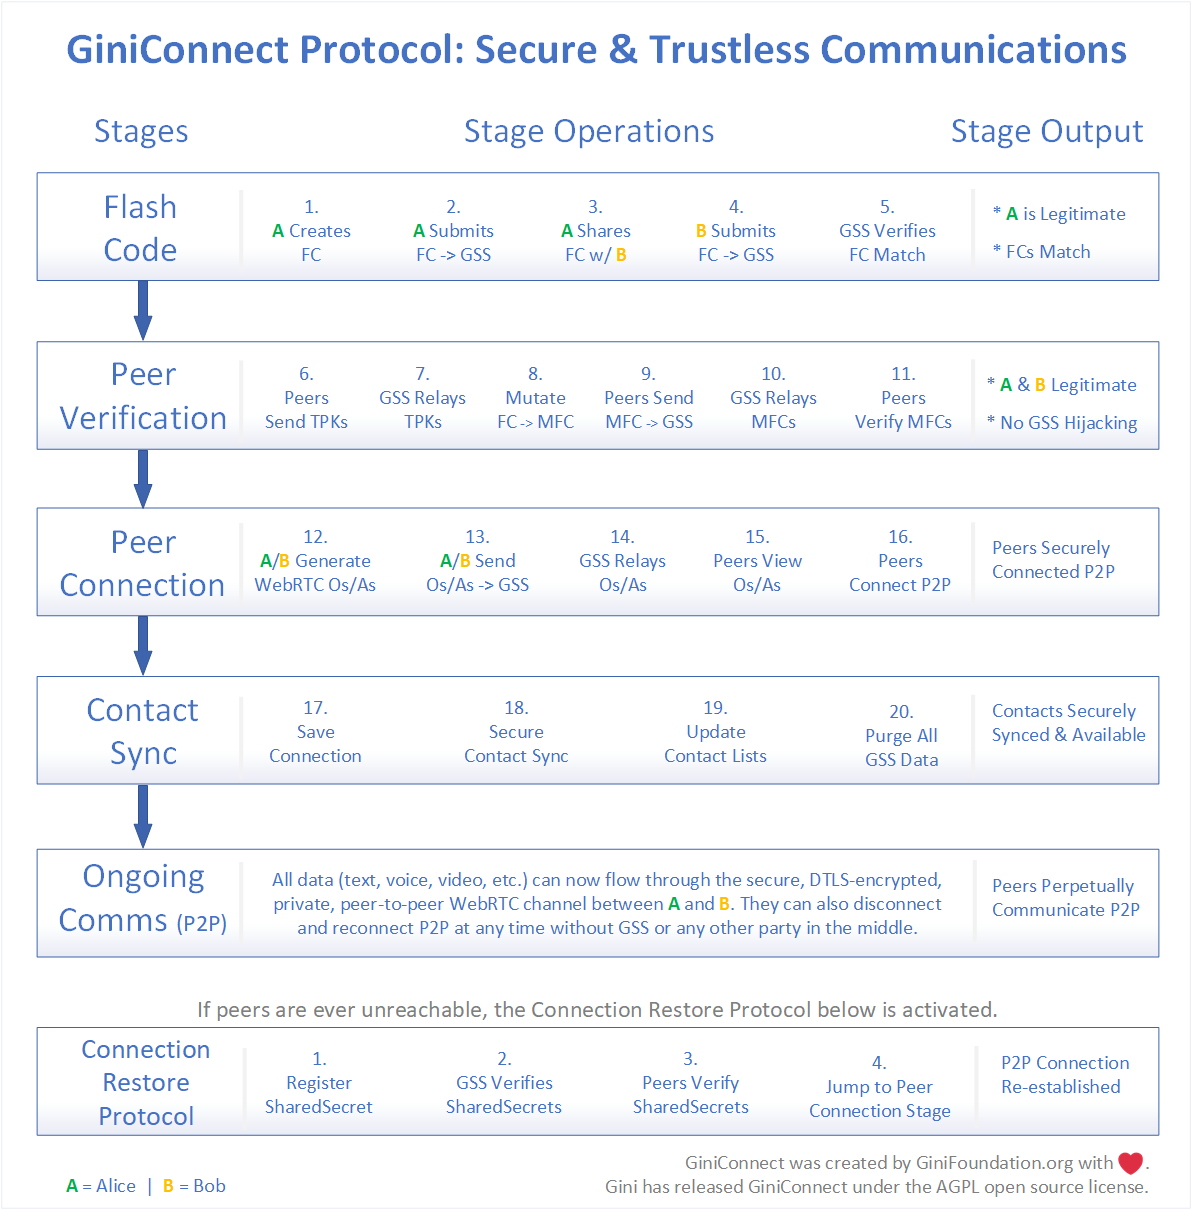 GiniConnect Protocol: Secure & Trustless Communications by GiniFoundation.org